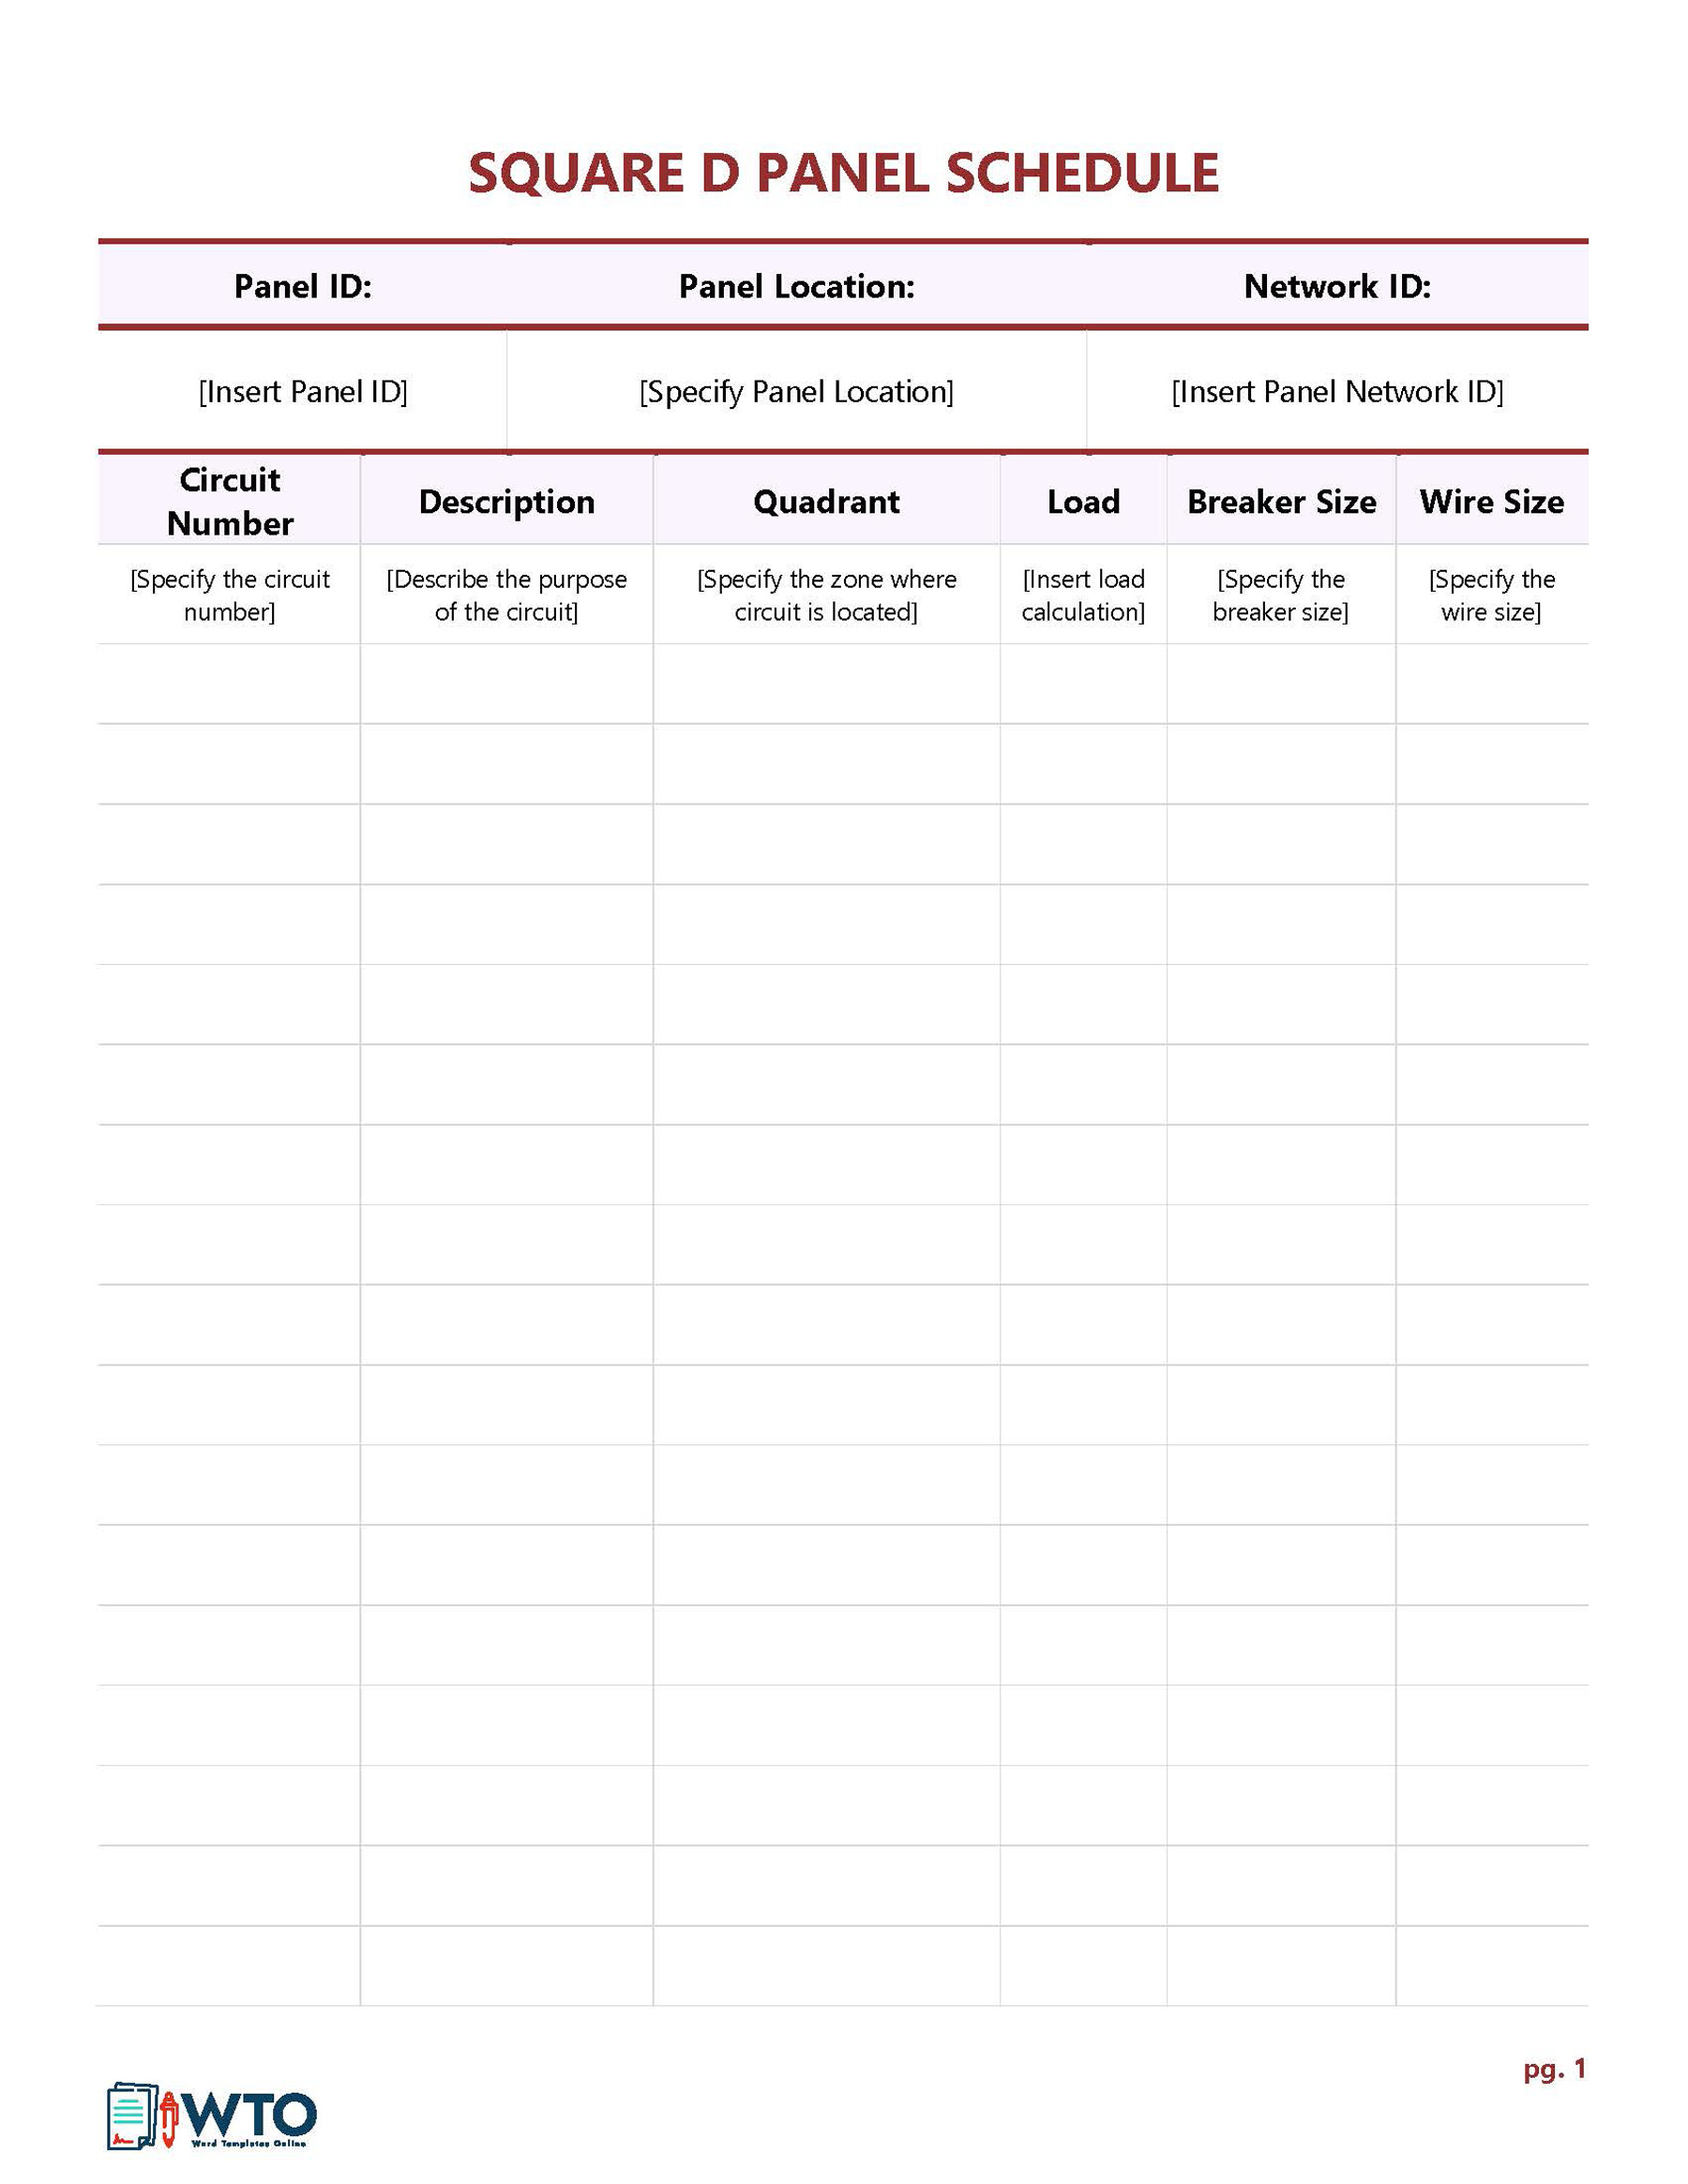 Free Panel Schedule (Square D) Template 01 in Word